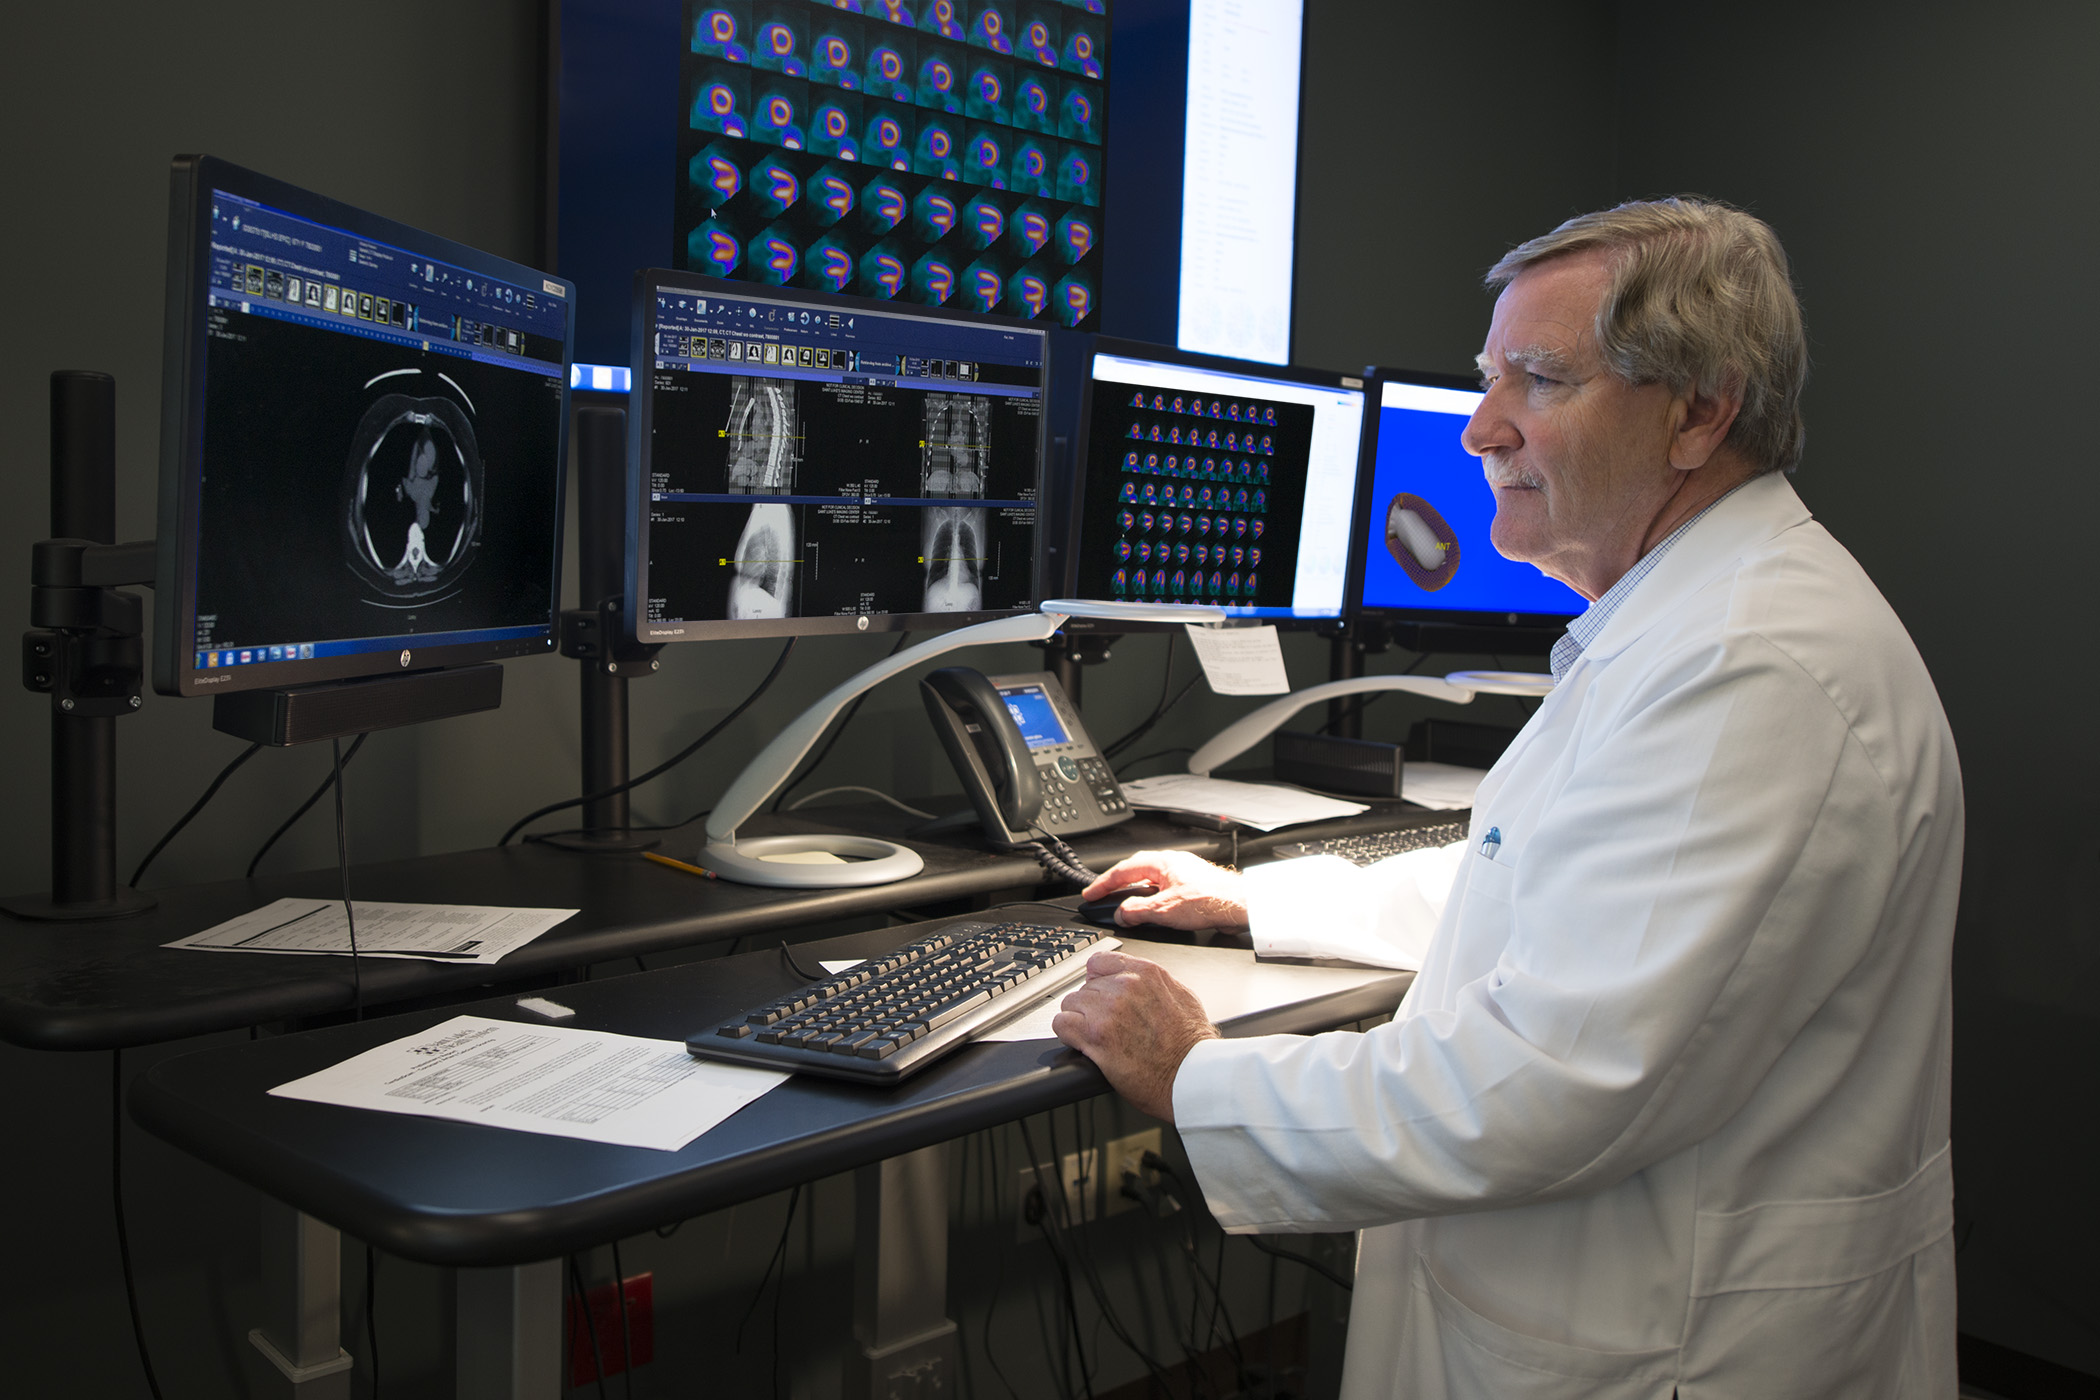 A Saint Luke's physician looks at nuclear imaging results